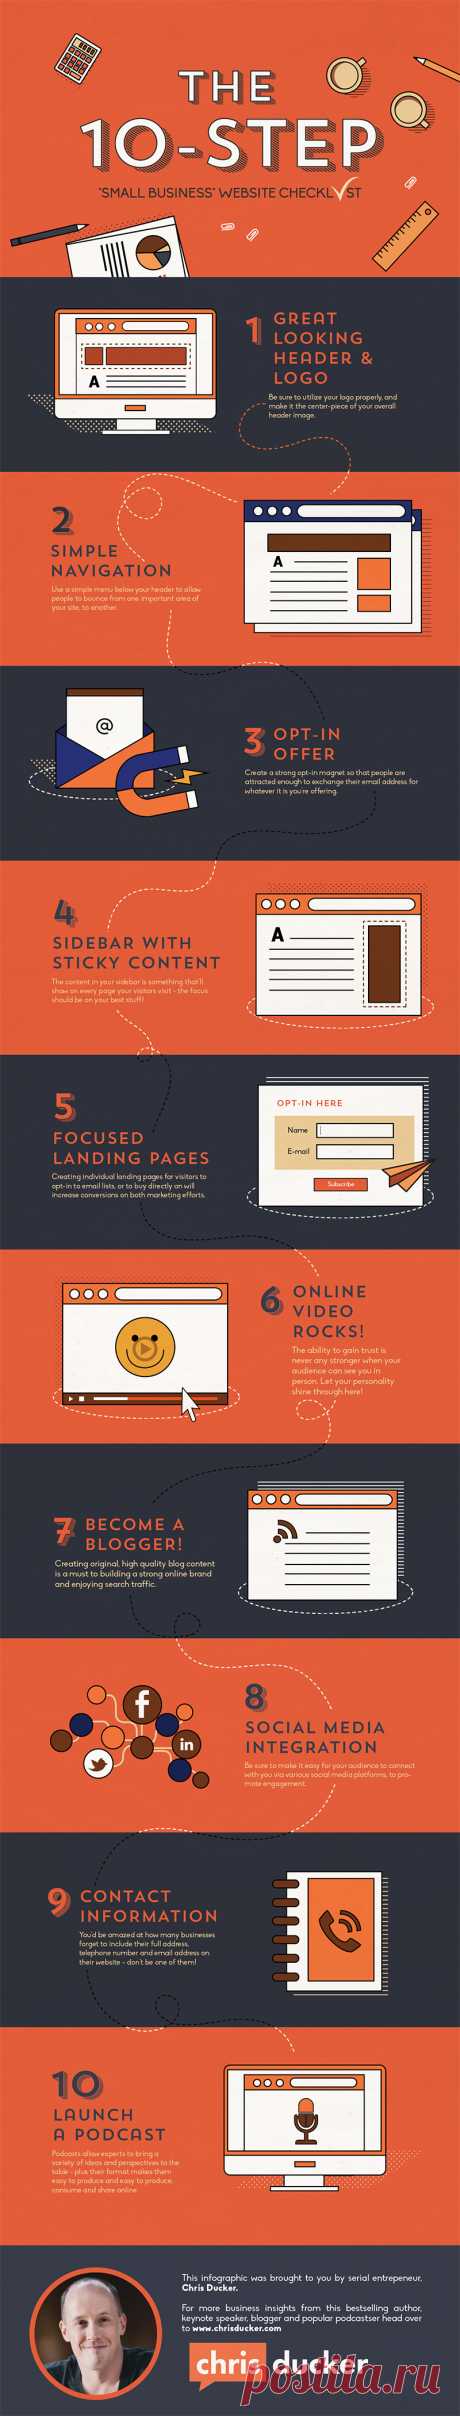 Web Design Checklist: 10 Tips for a More Effective Business Website - Infographic
What Is Visual Search?
Why Is Visual Search Suddenly a Thing?
What’s So Great About Visual Search?
What Does Visual Search Look Like in Action?
How Popular Is Visual Search?
What Can Marketers Do to Optimise for Visual Search?